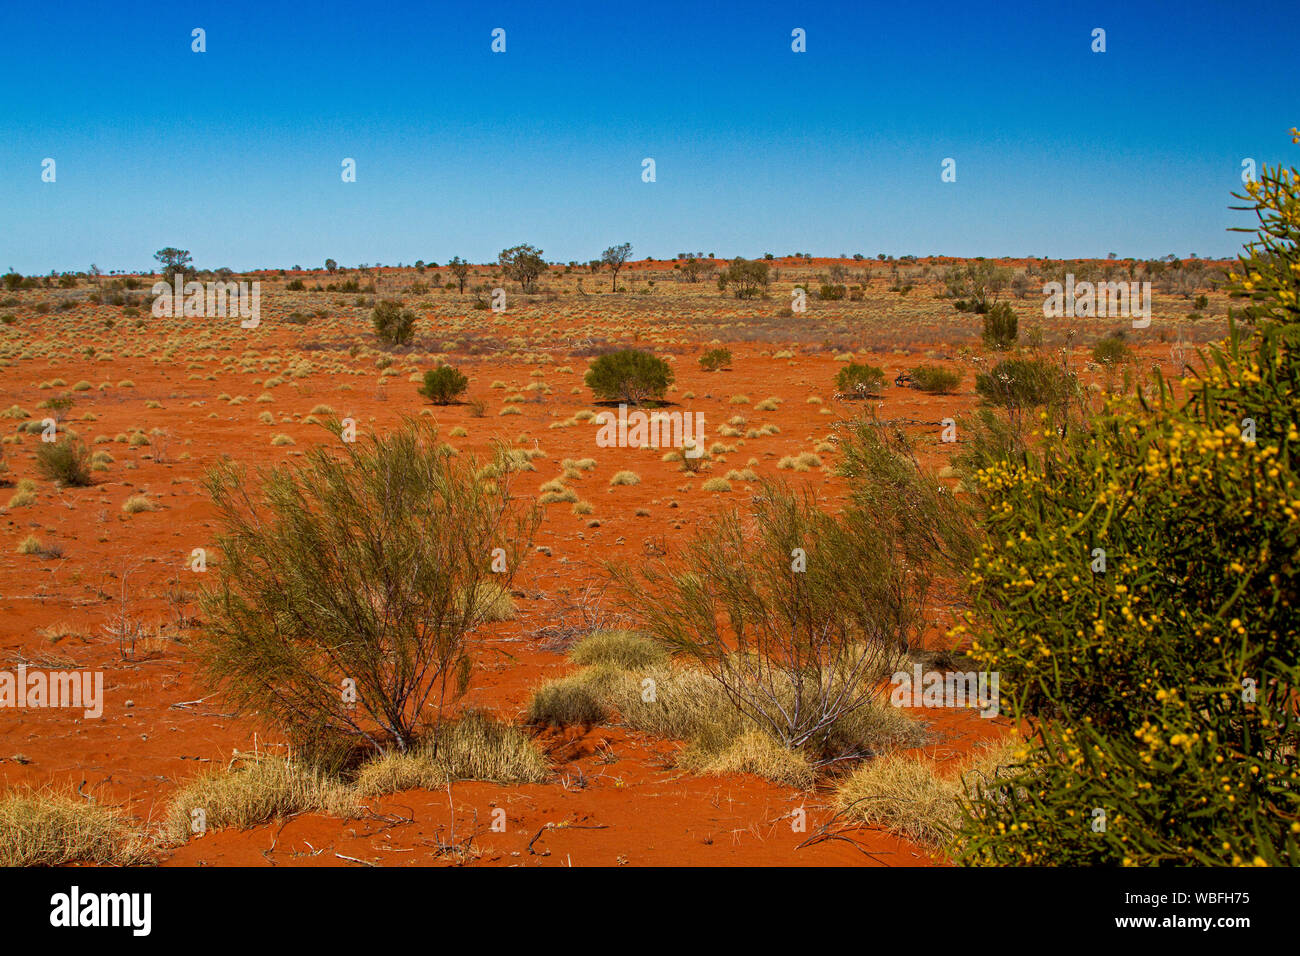 Australian outback landscape with clumps of dry spinifex grass and low shrubs on red sandy soil under blue sky in western Queensland Stock Photo